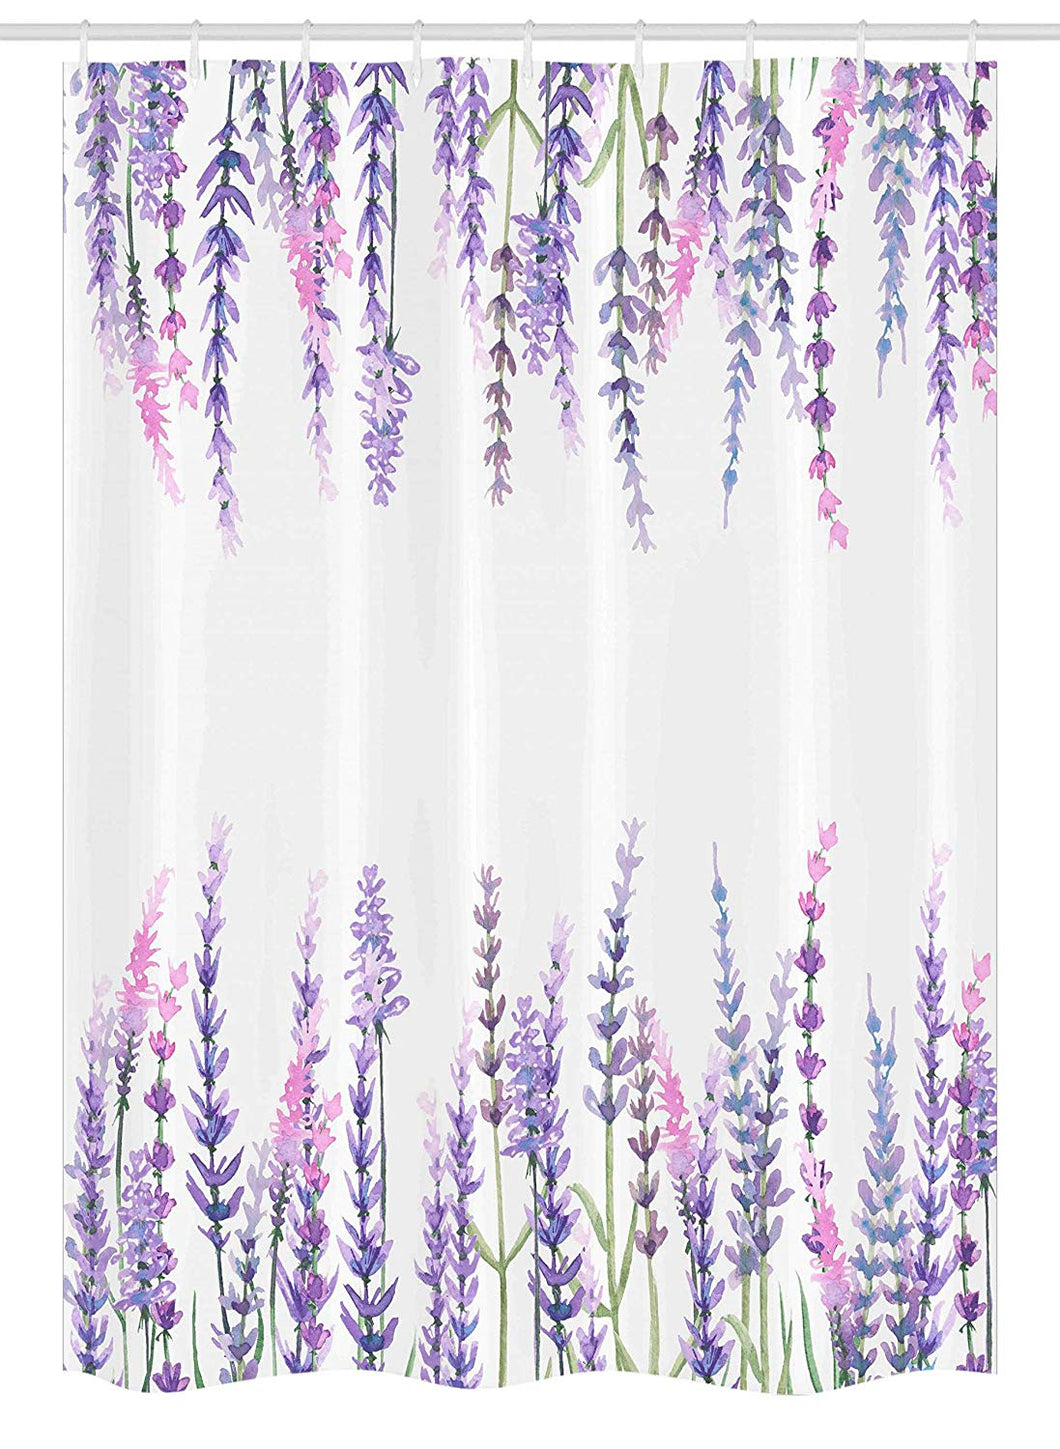 Ambesonne Purple Stall Shower Curtain, Lavender Plants Aromatic Evergreen Shrub of Mint Family Nature Oil Country Style Print, Fabric Bathroom Decor Set with Hooks, 54 W x 78 L Inches, Lilac